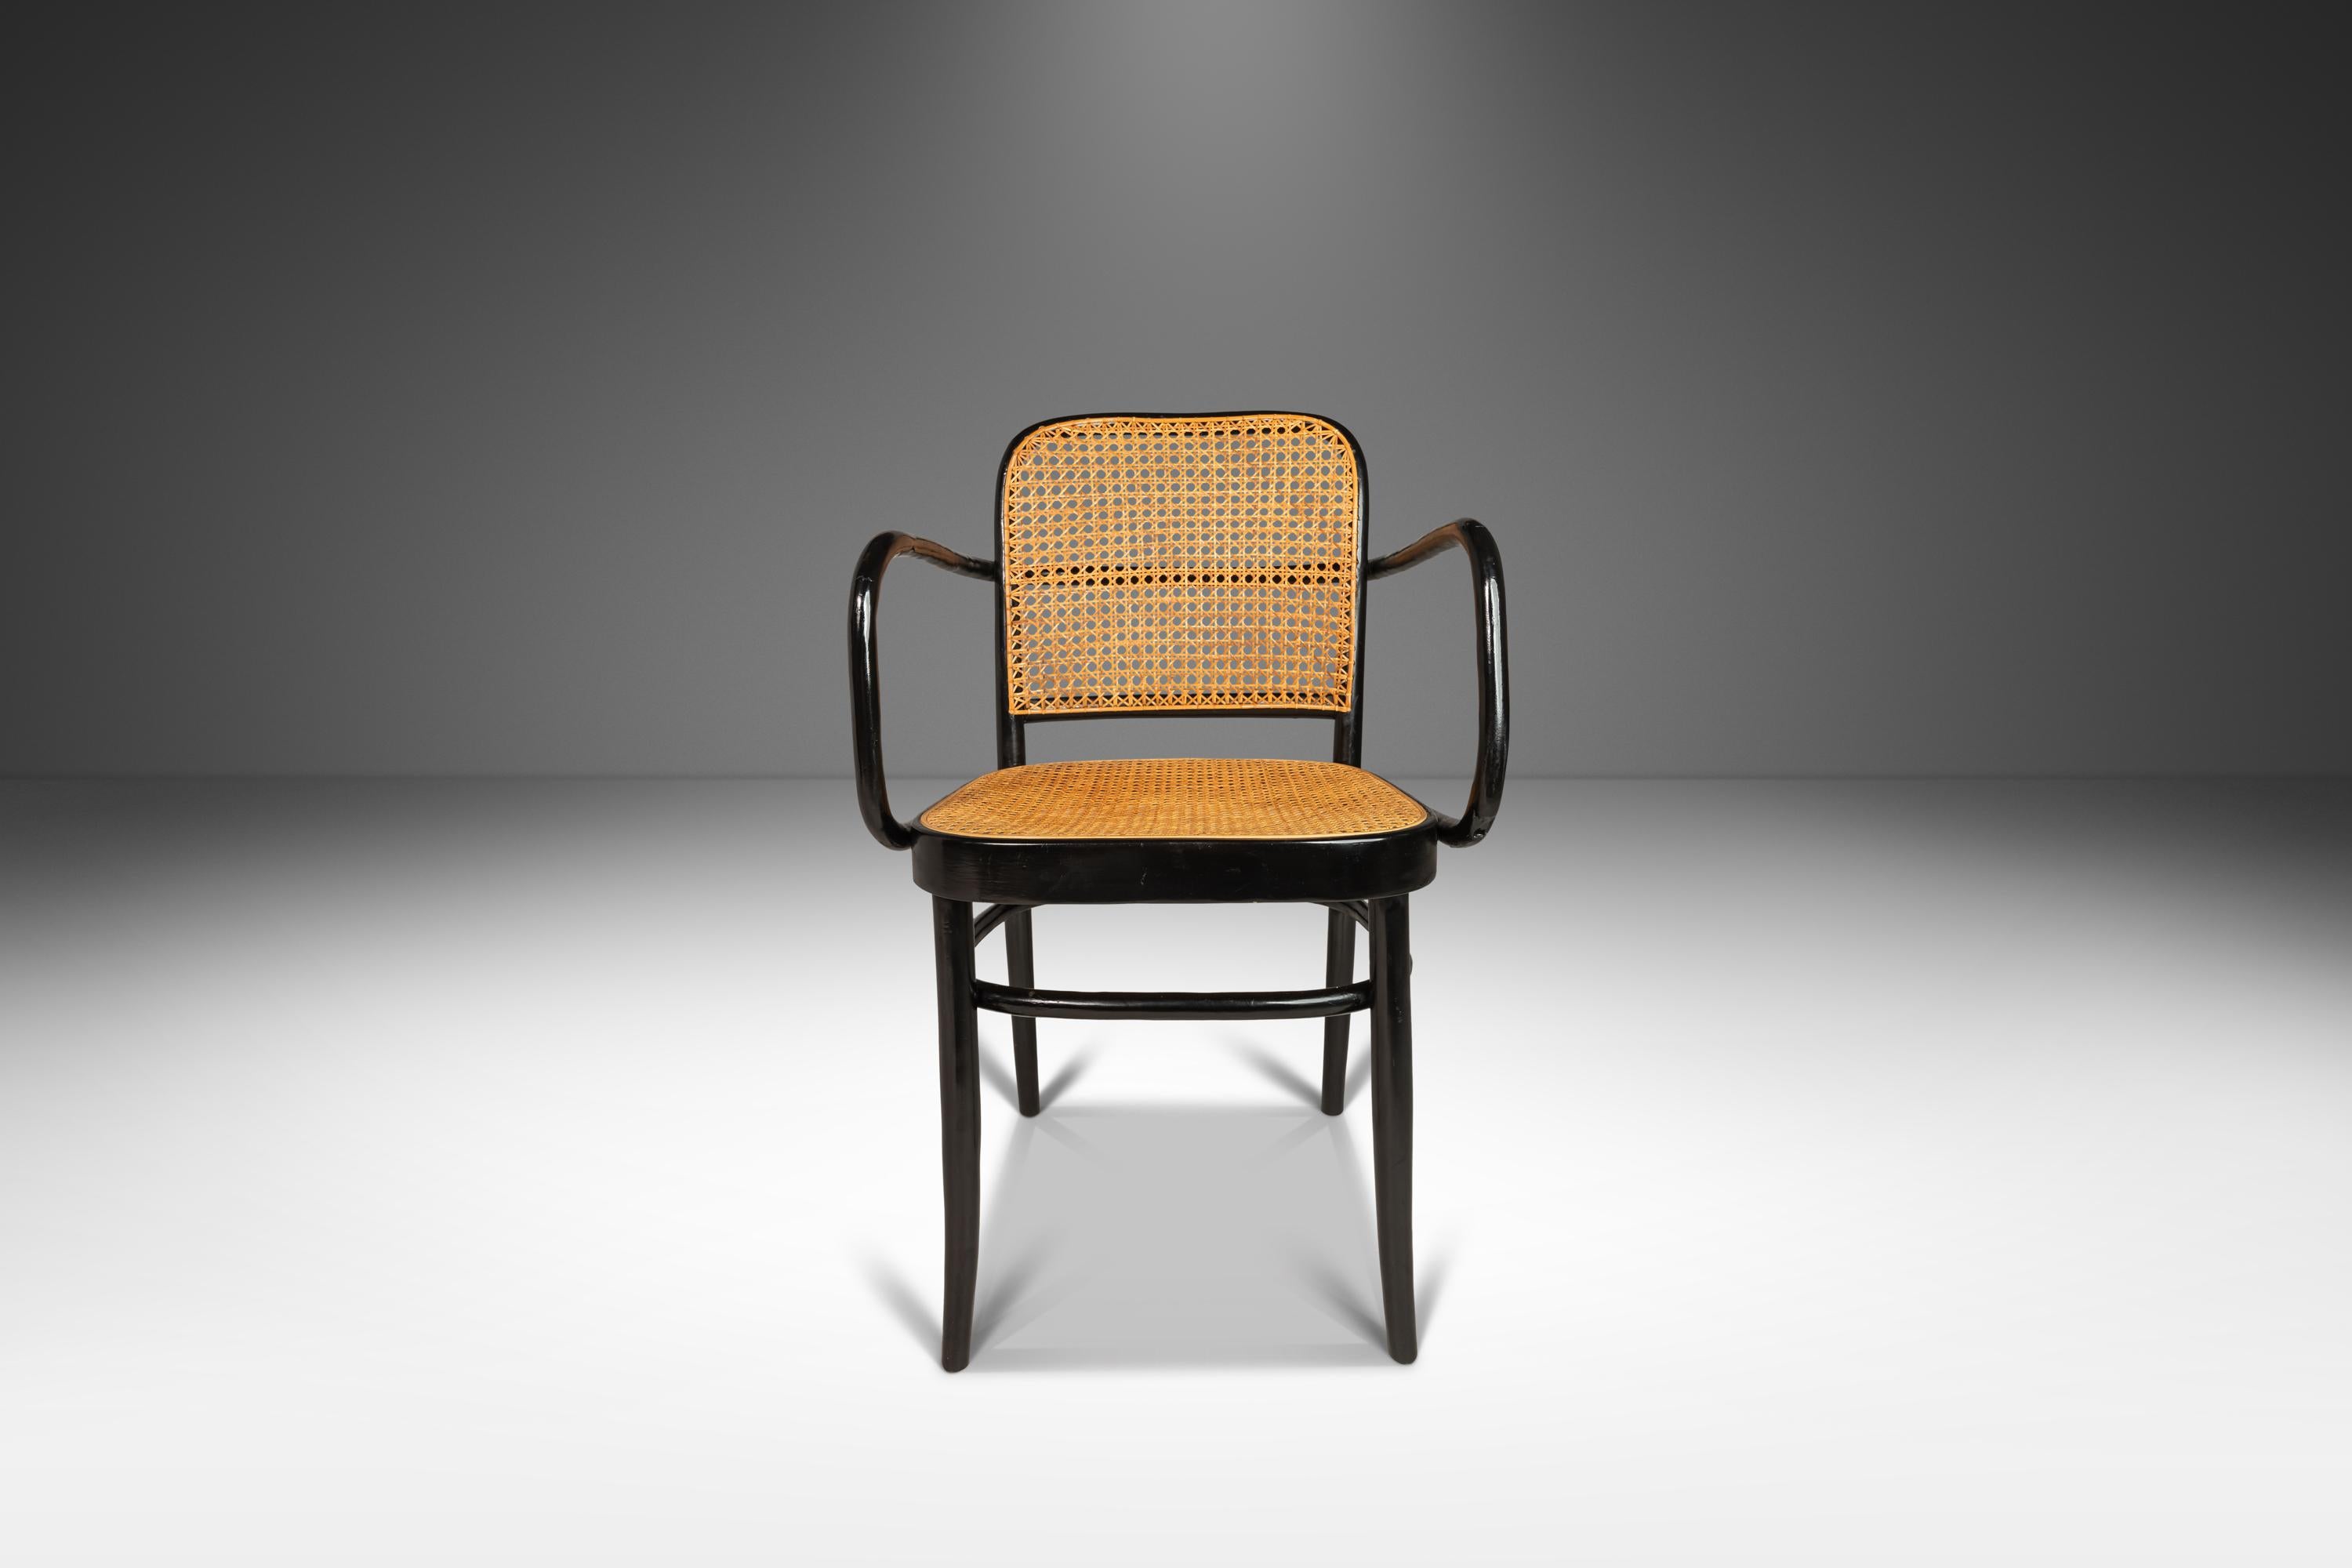 Introducing a rare and beautiful single Bentwood Prague Model 811 Dining Chair by the renowned designers Josef Frank and Josef Hoffmann for Stendig. Designed in the 1960s, this chair is a true representation of mid-century modern design and